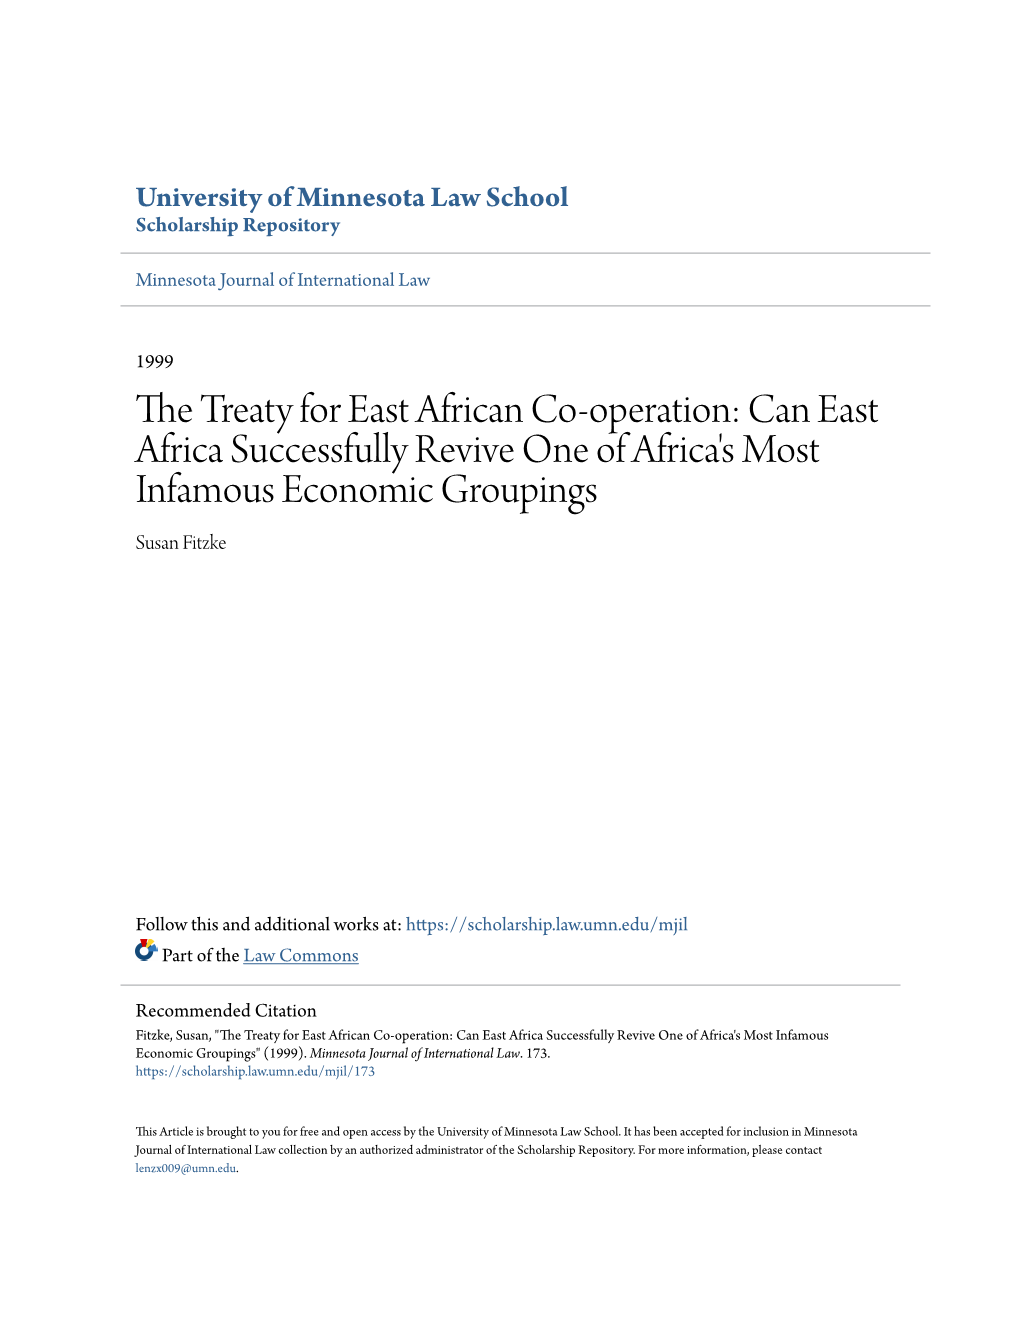 The Treaty for East African Co-Operation: Can East Africa Successfully Revive One of Africa's Most Infamous Economic Groupings?